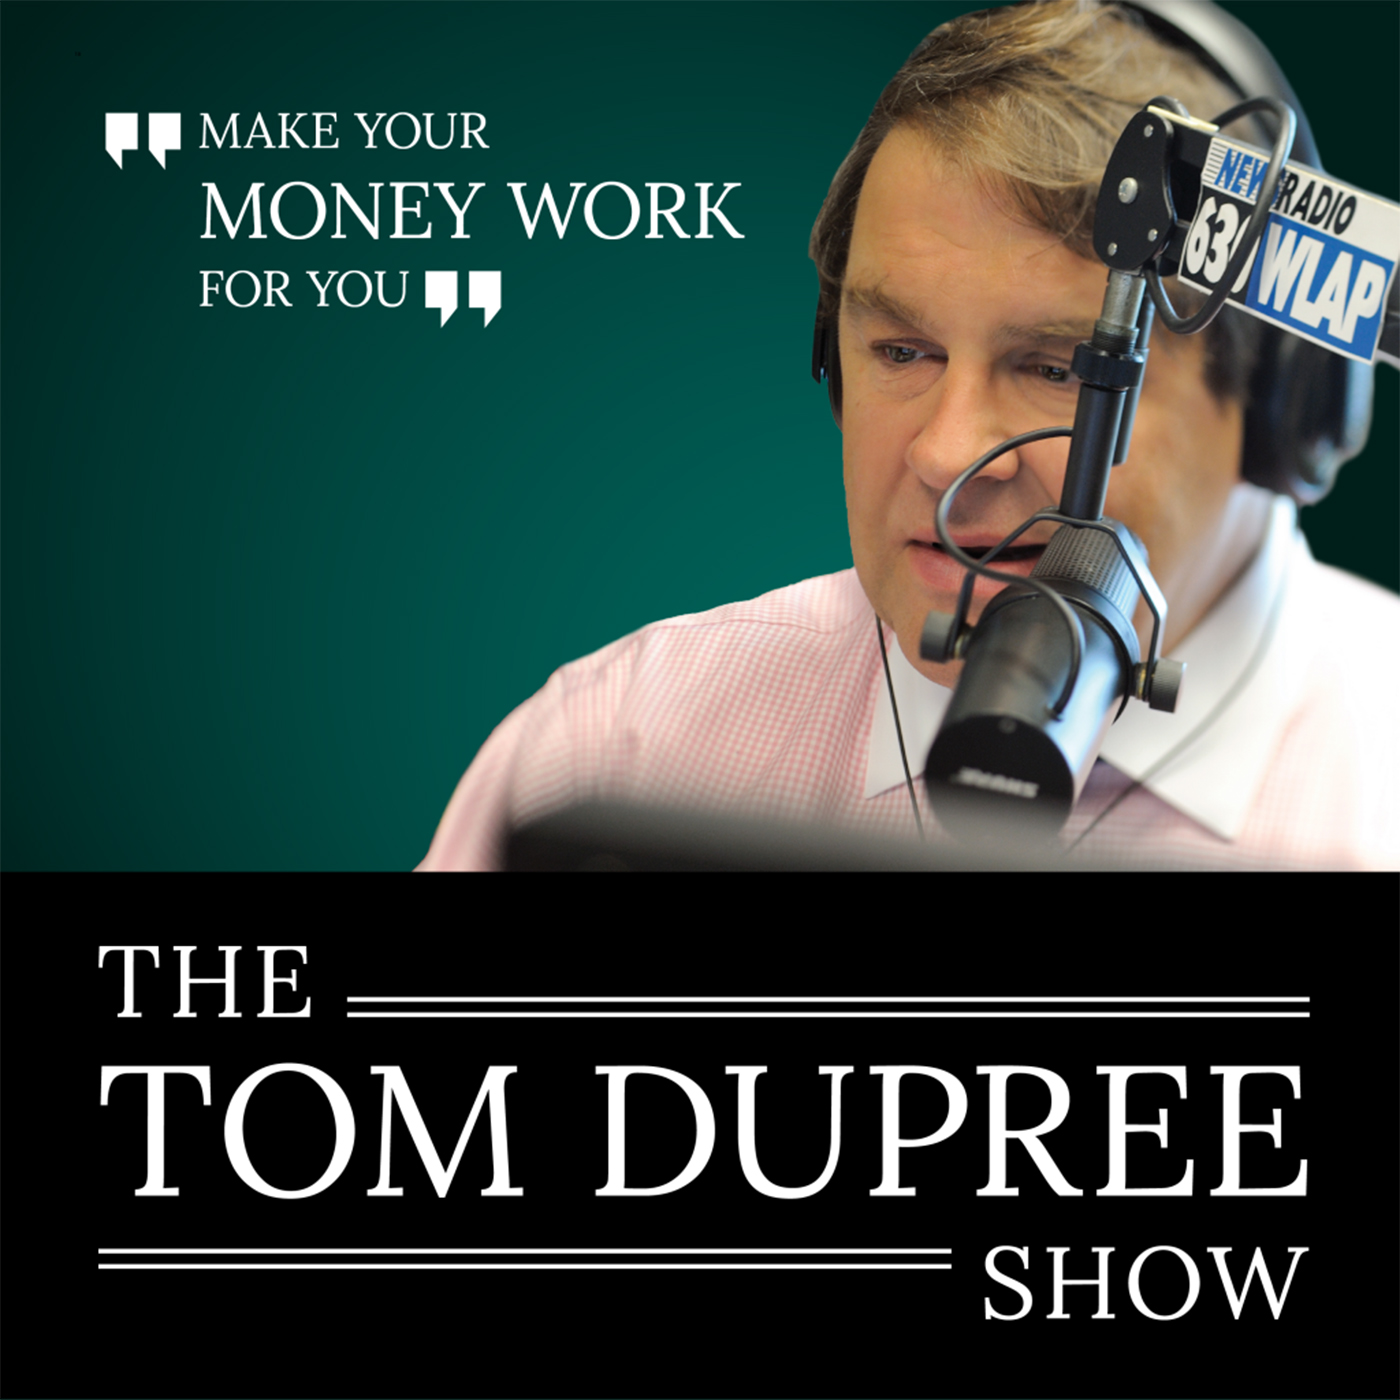 A highlight from The Tom Dupree Show. HOUR1 (Season 12 Episode 72)